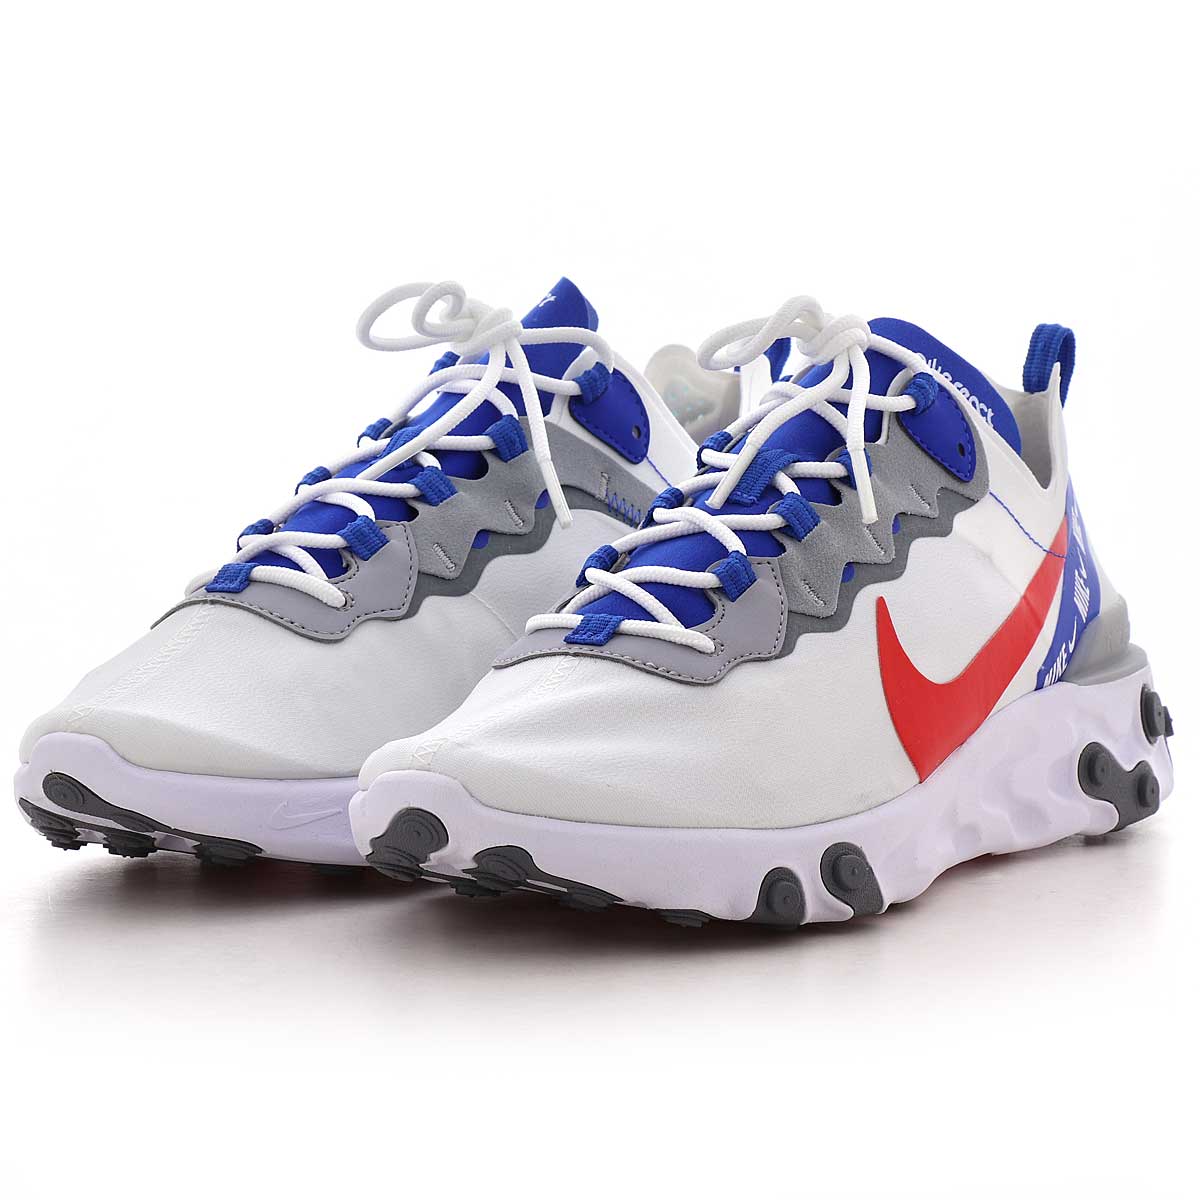 Buy REACT ELEMENT 55 for N/A 0.0 on 